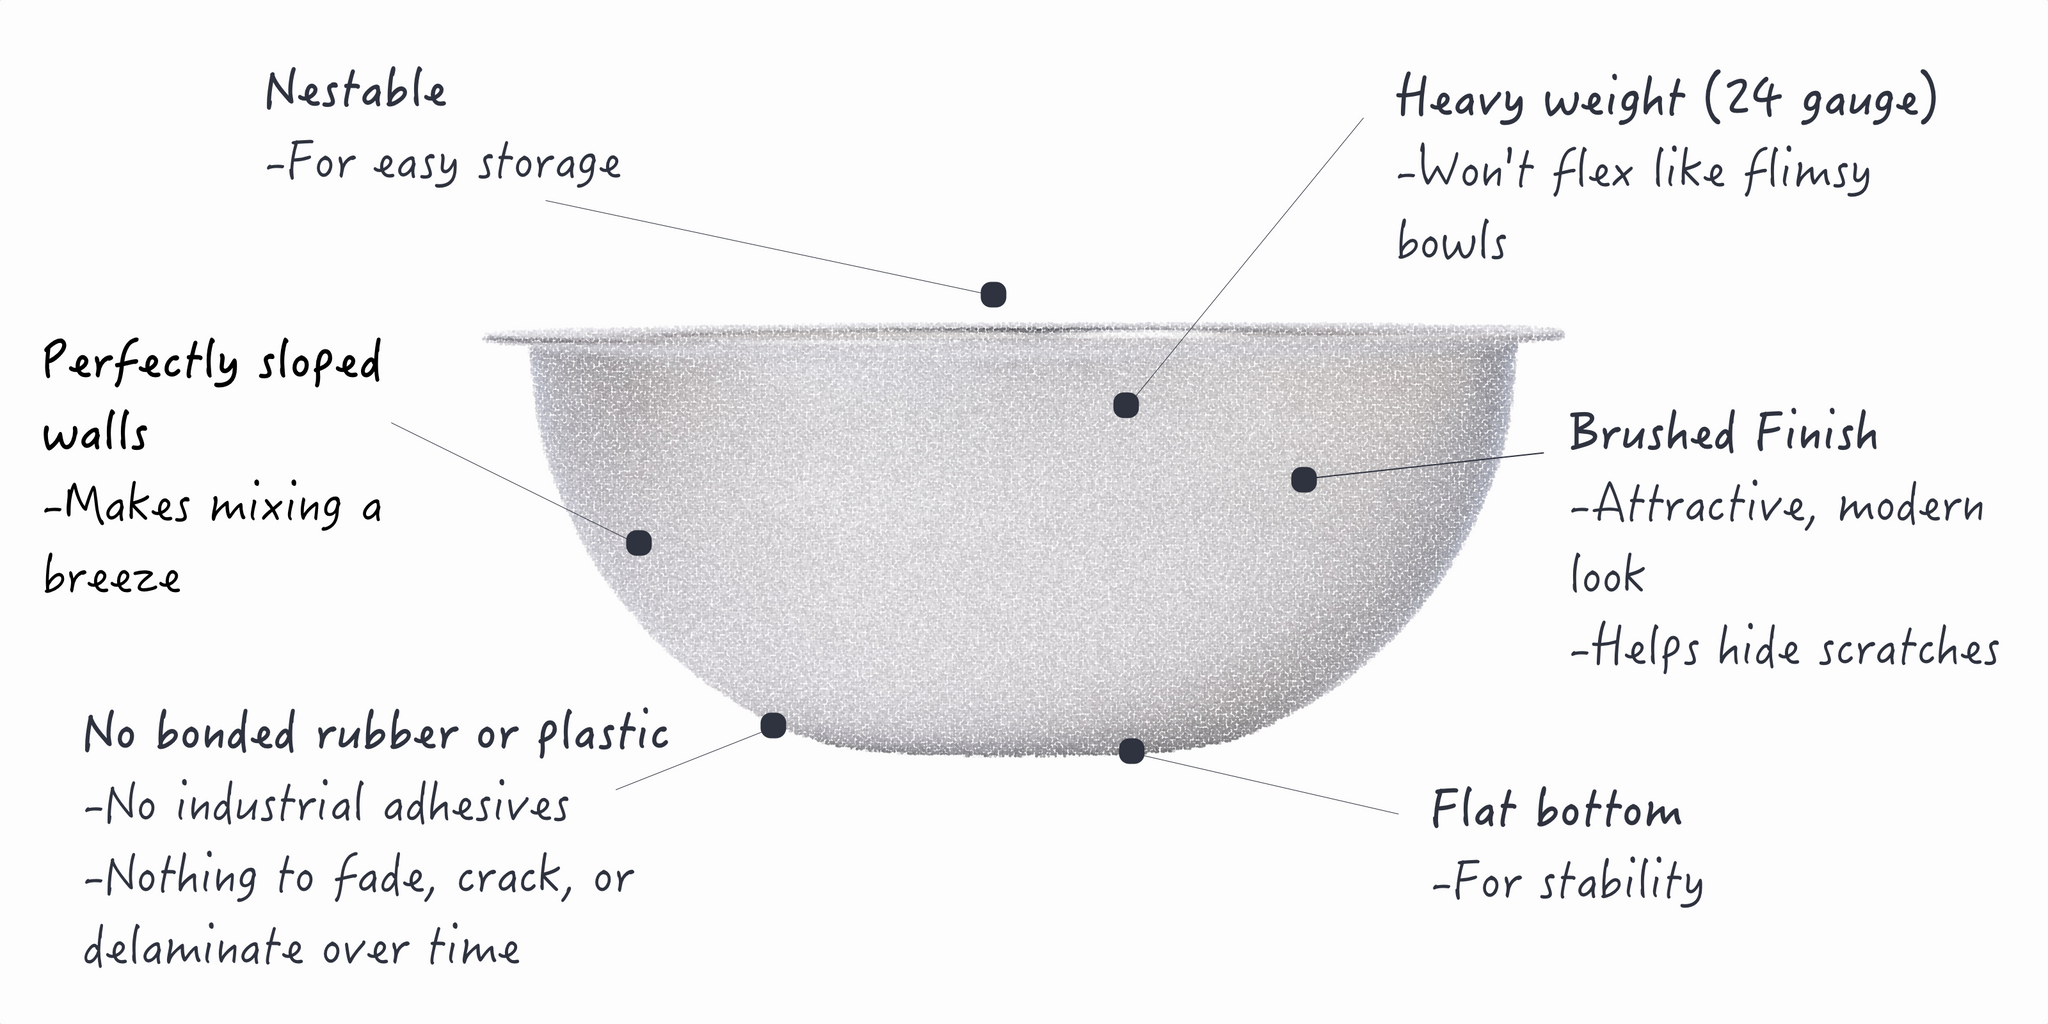 Infographic highlighting the design features of the Workhorse Mixing Bowls. Text descriptions read “Heavy weight (24 gauge): Won’t flex like flimsy bowls”, “Brushed Finish: Attractive, modern look; Helps hide scratches”, “Flat bottom: For stability”, “Nest-able: For easy storage”, “Perfectly sloped walls: Makes mixing a breeze”, and “No bonded rubber or plastic: No industrial adhesives; Nothing to fade, crack, or delaminate over time”. 